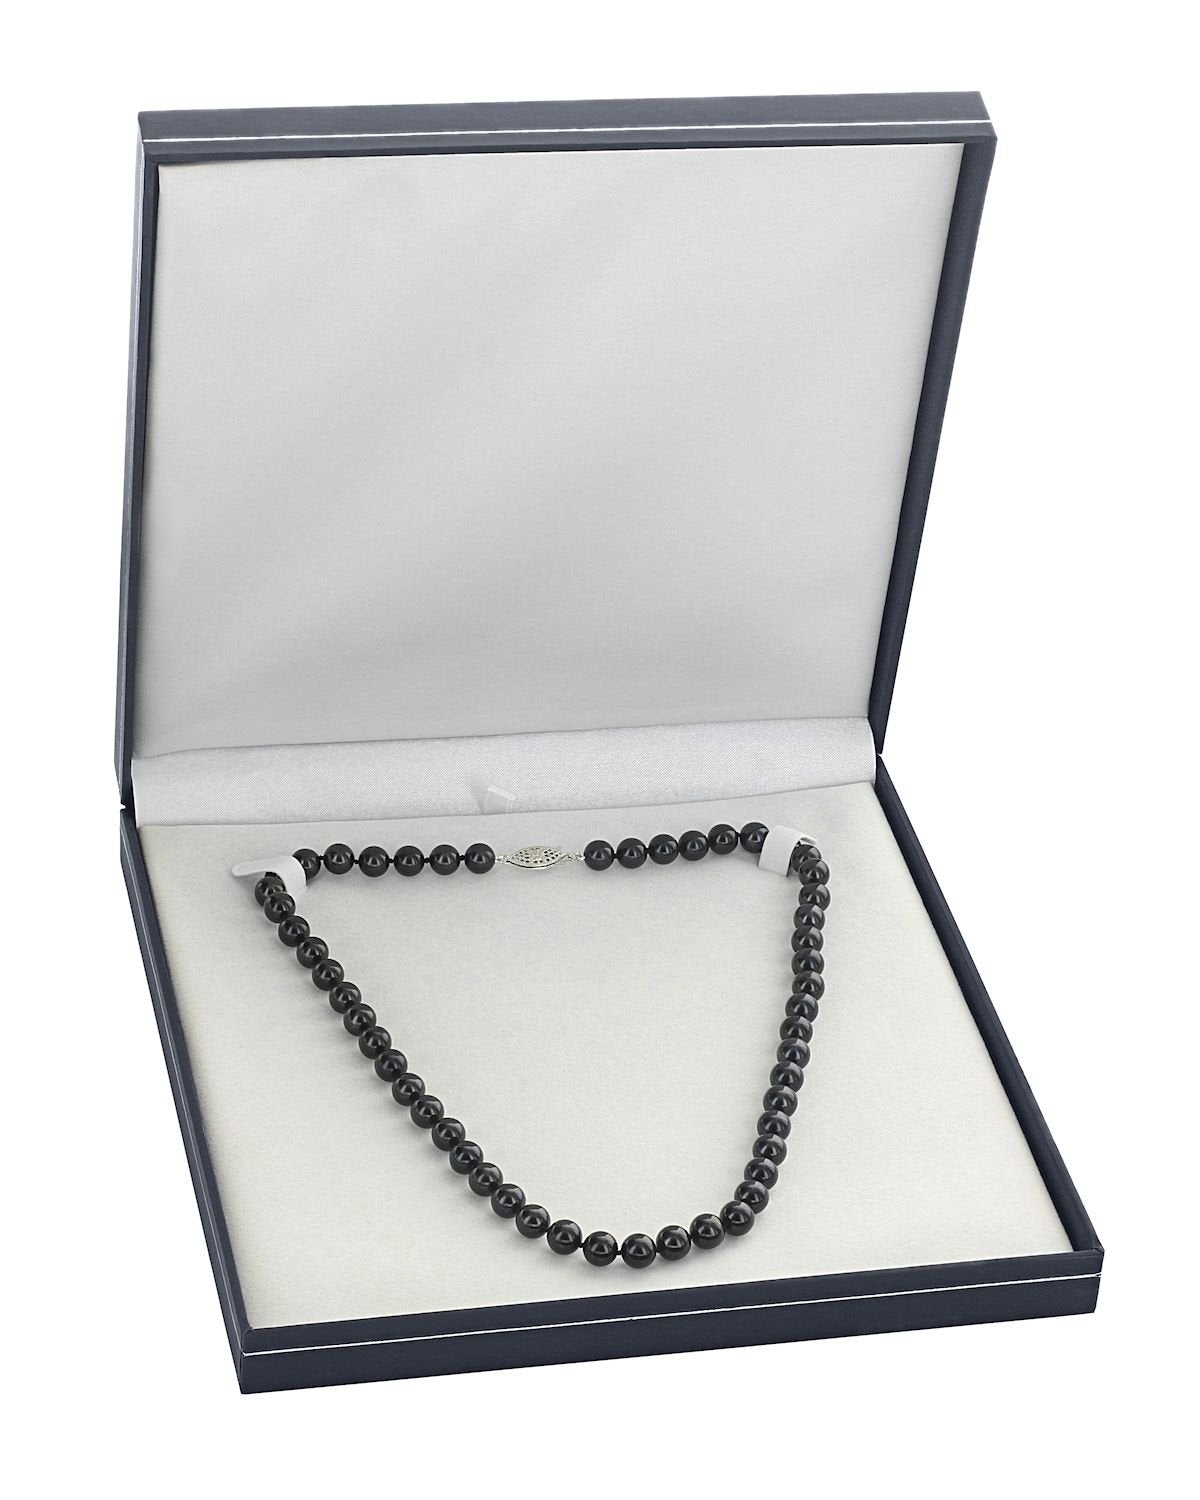 8.5-9.0mm Japanese Akoya Black Pearl Necklace - AA+ Quality - Fourth Image